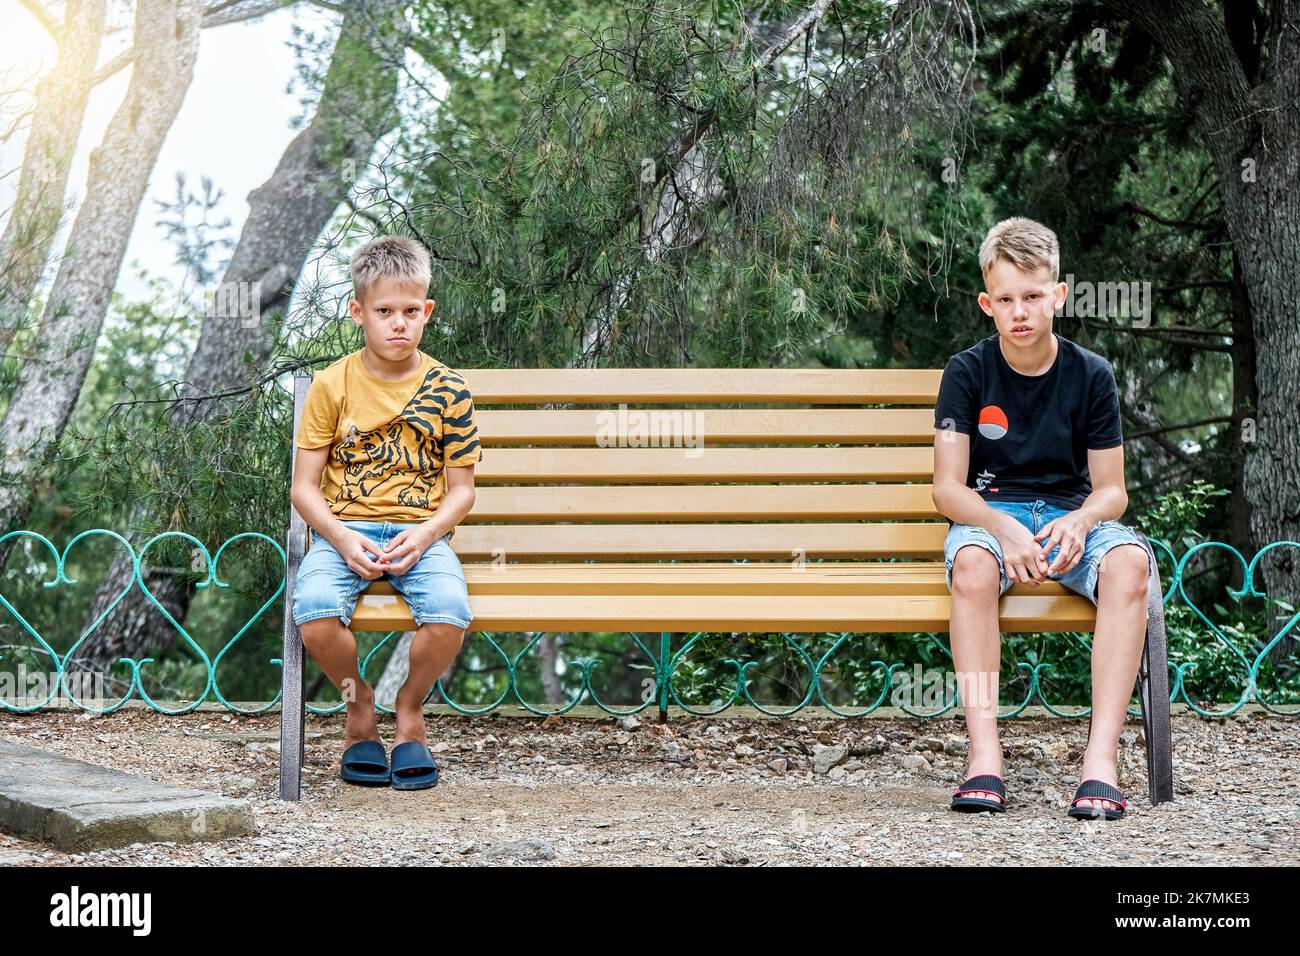 Siblings sitting on wooden bench look with upset and disappointed expressions. Brothers sit on different sides of bench in silence after argument Stock Photo